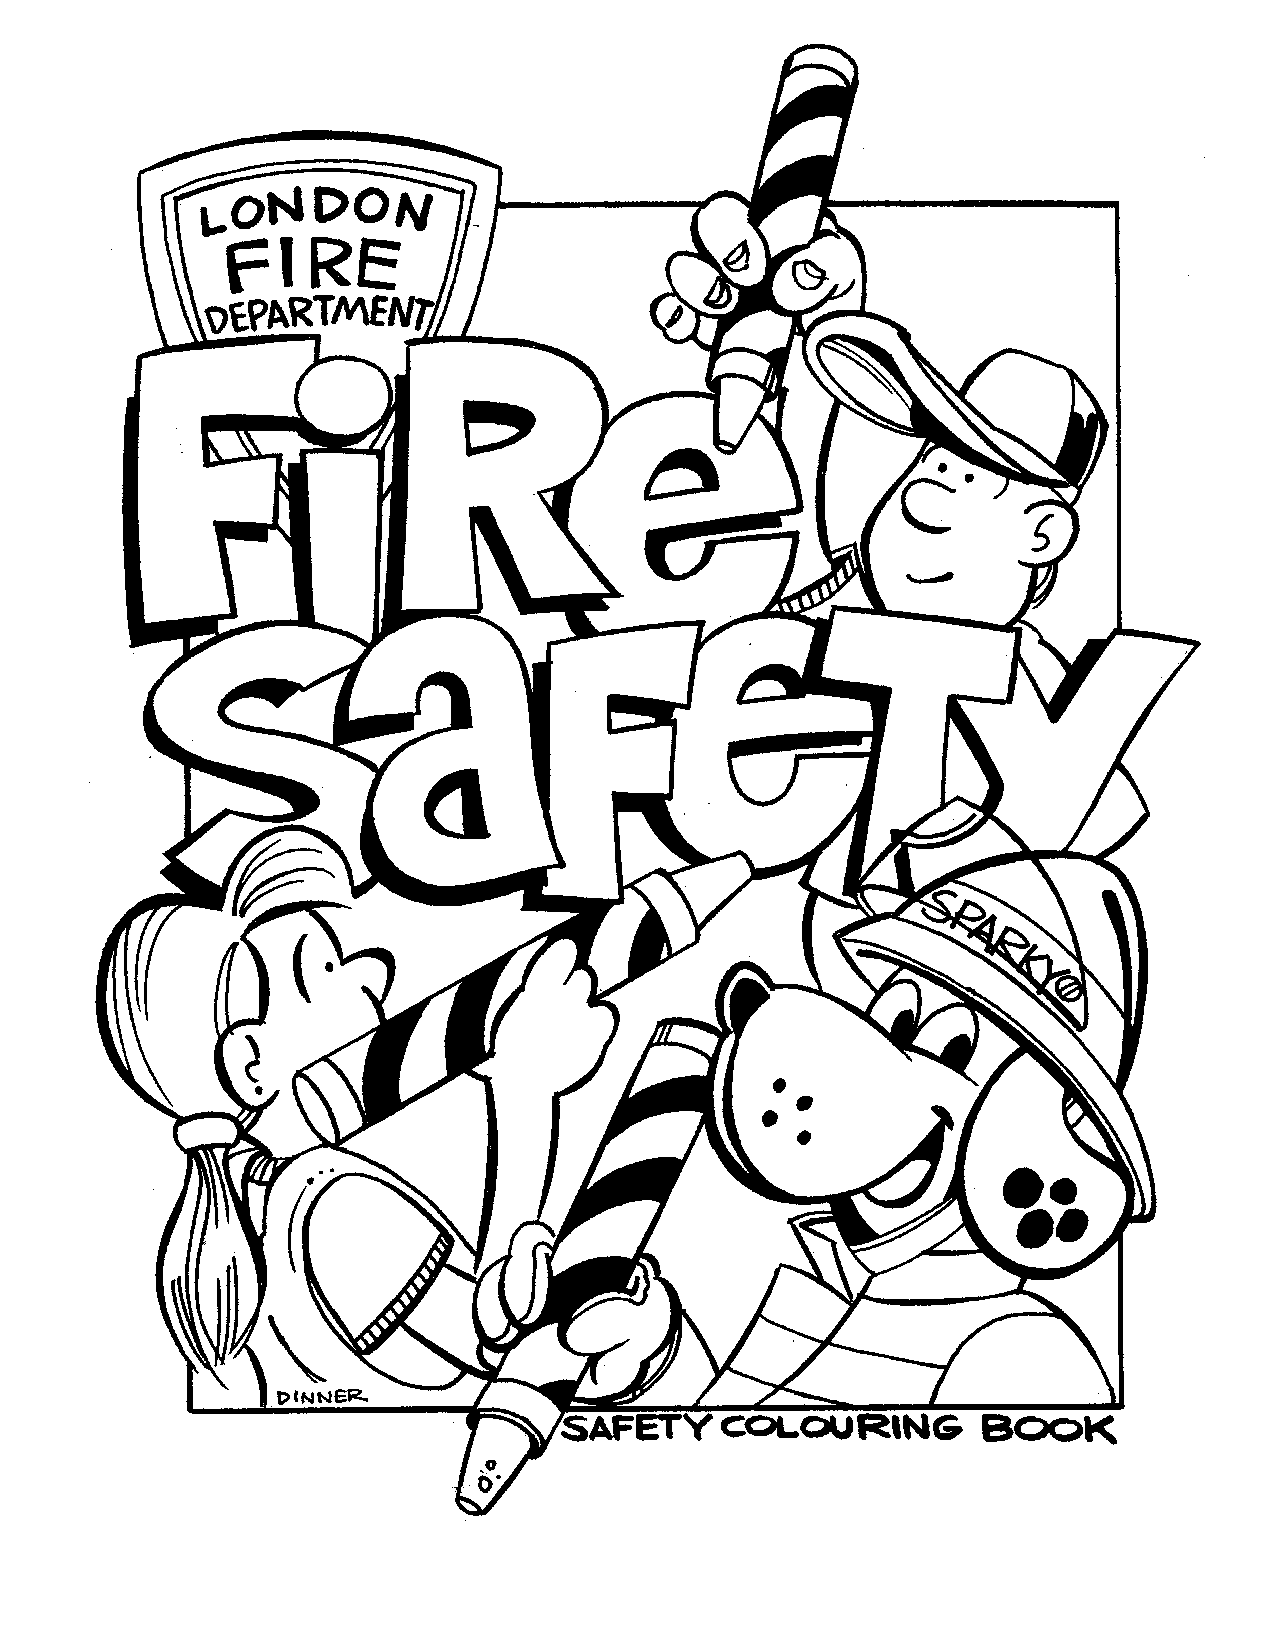 Safety Signs Coloring Pages - AZ Coloring Pages